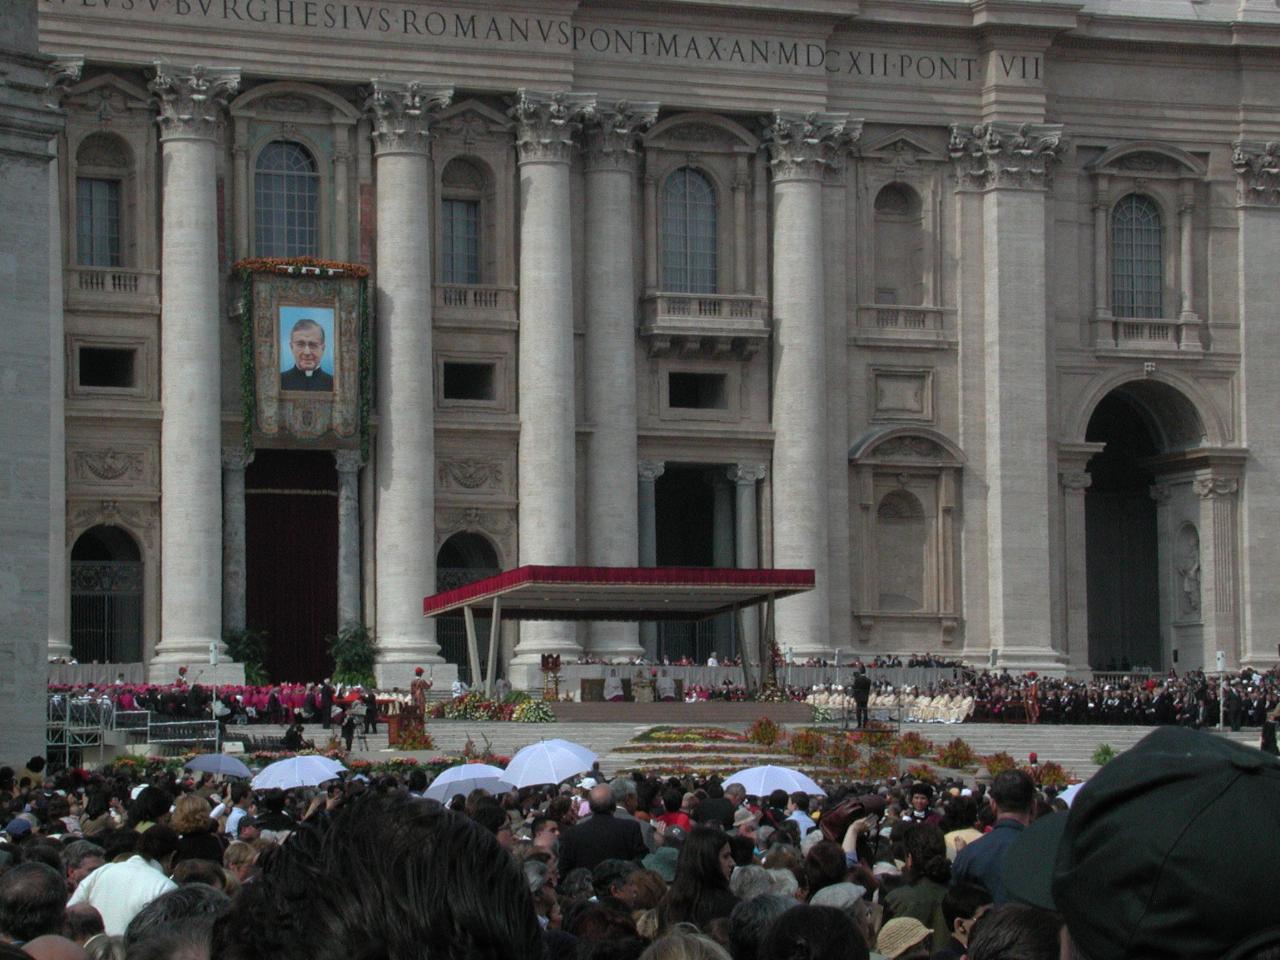 Priests were under the white umbrellas to make their location highly visible